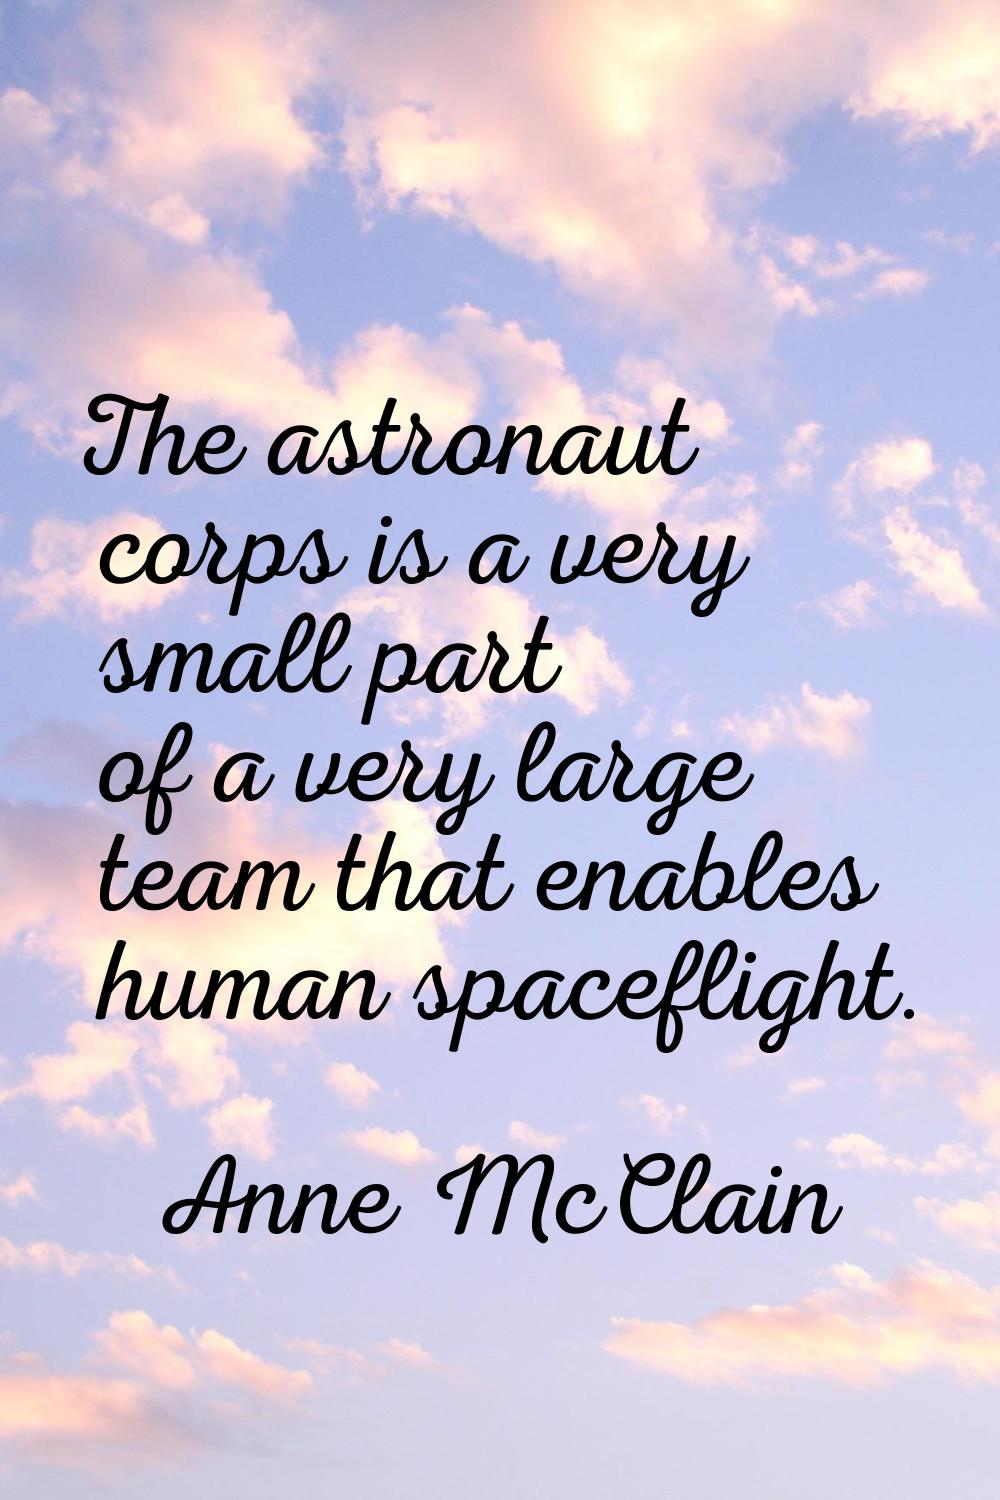 The astronaut corps is a very small part of a very large team that enables human spaceflight.